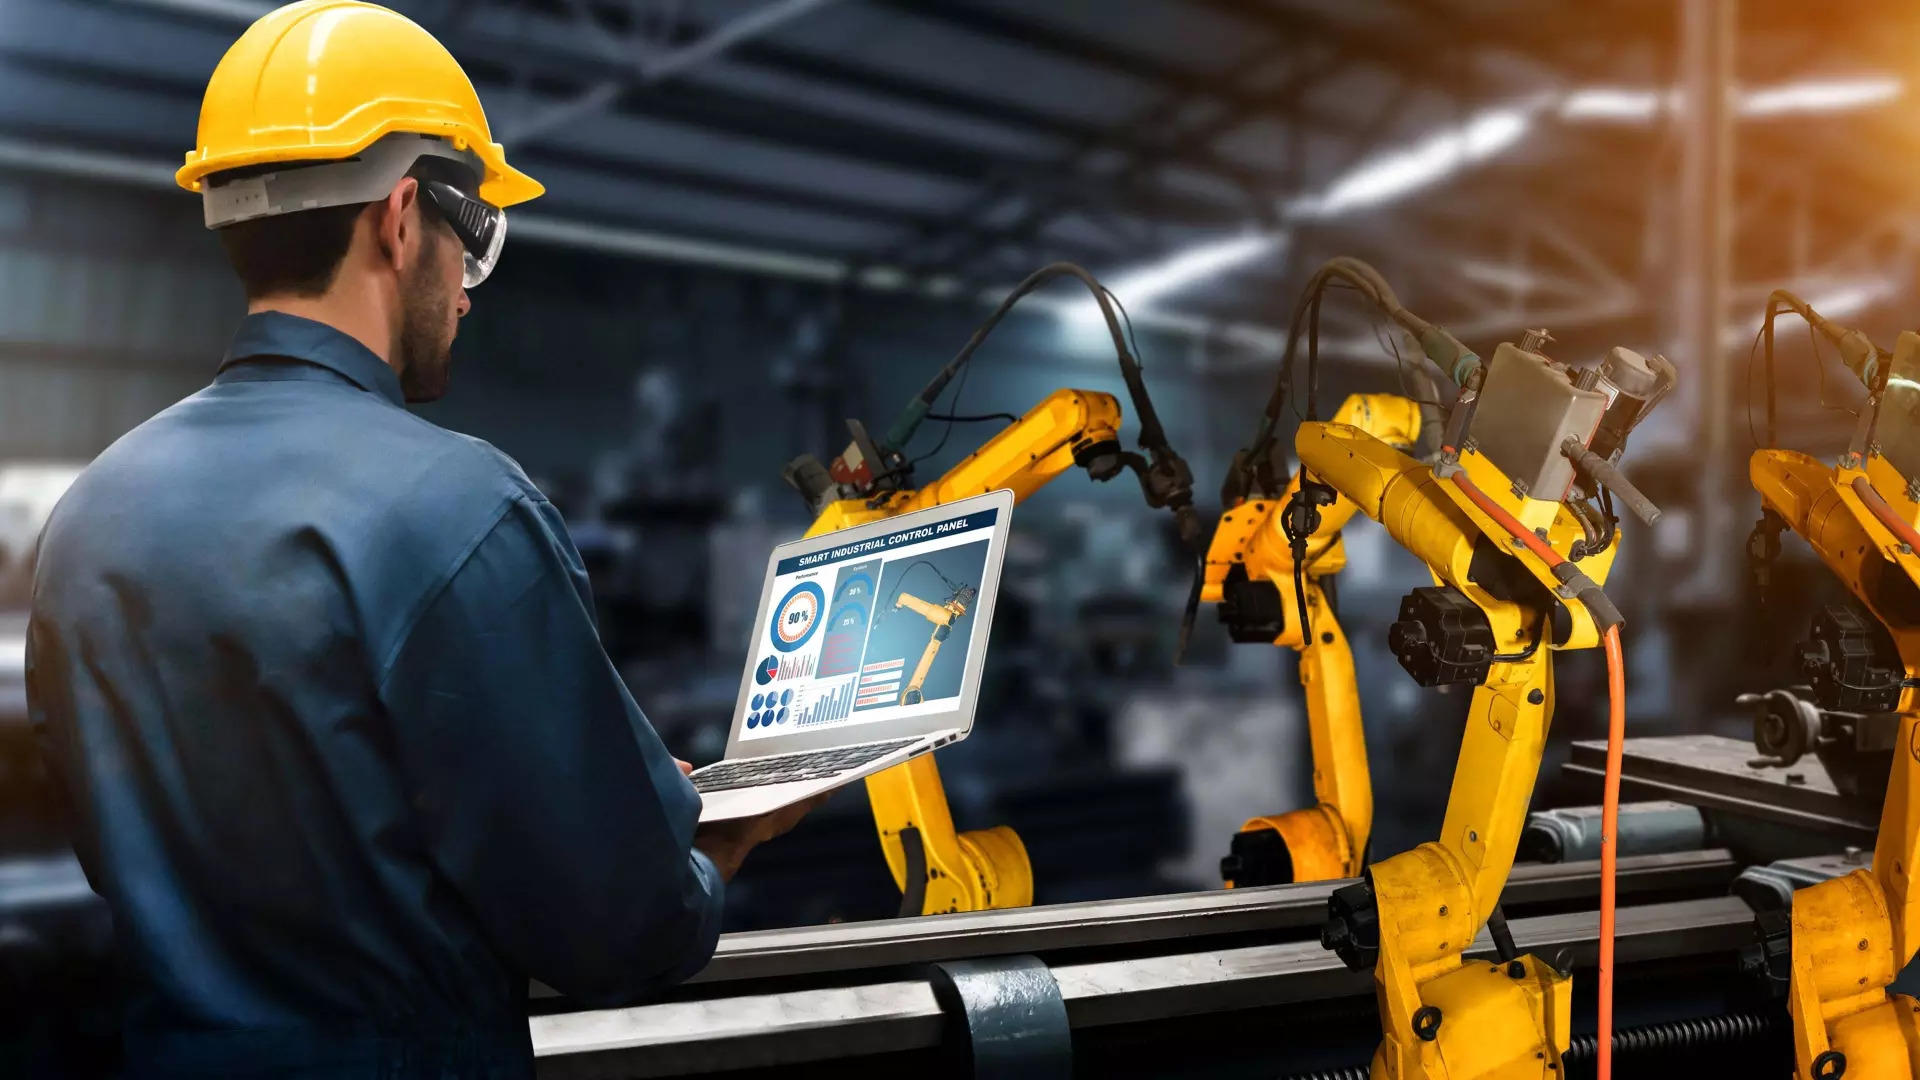 Industrial IoT and the Benefits of Edge Computing